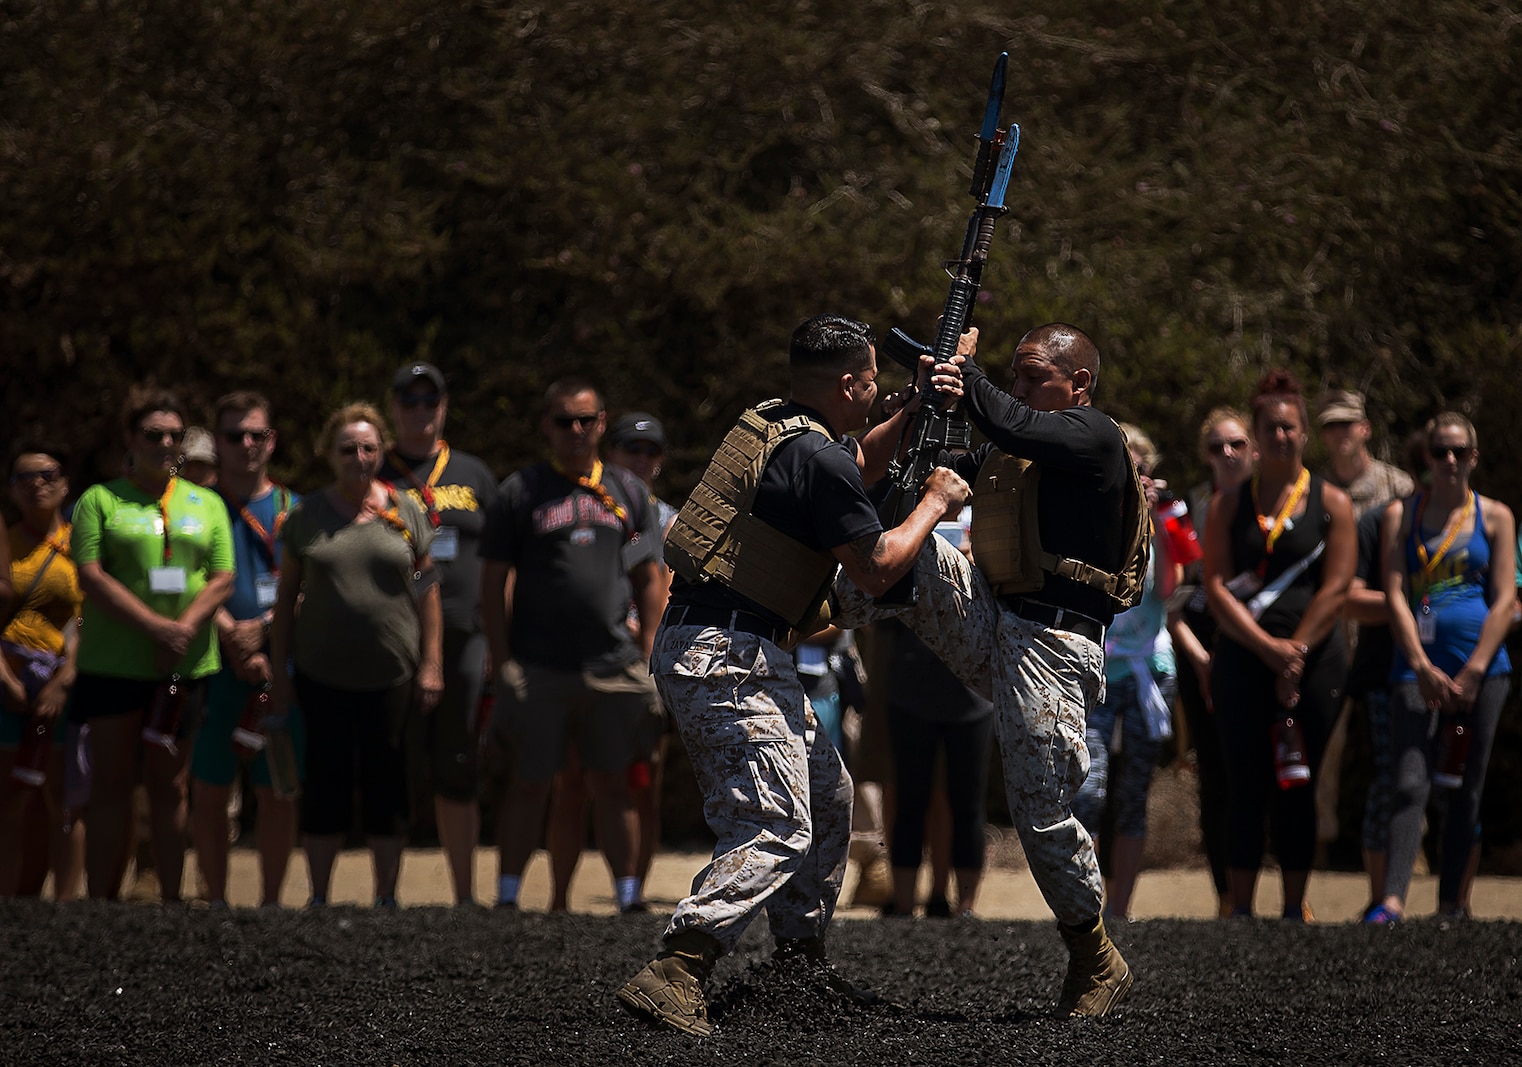 Sgts. Nelson Chavez (right) and Milton Zavala, both Marine Corps drill instructors, demonstrate Marine Corps Martial Arts Program techniques for high school teachers from Washington, Oregon, Idaho and Montana during an Educators Workshop at Marine Corps Recruit Depot San Diego, Aug. 16, 2016. The mission of the Educators Workshop is to inform, demonstrate and build relationships while providing educators and community influencers with firsthand knowledge of the Marine Corps recruiting process, entry level training, job opportunities and educational benefits available to Marines. Chavez is from Miami. Zavala is from Houston. (U.S. Marine Corps photo by Staff Sgt. Reece Lodder)